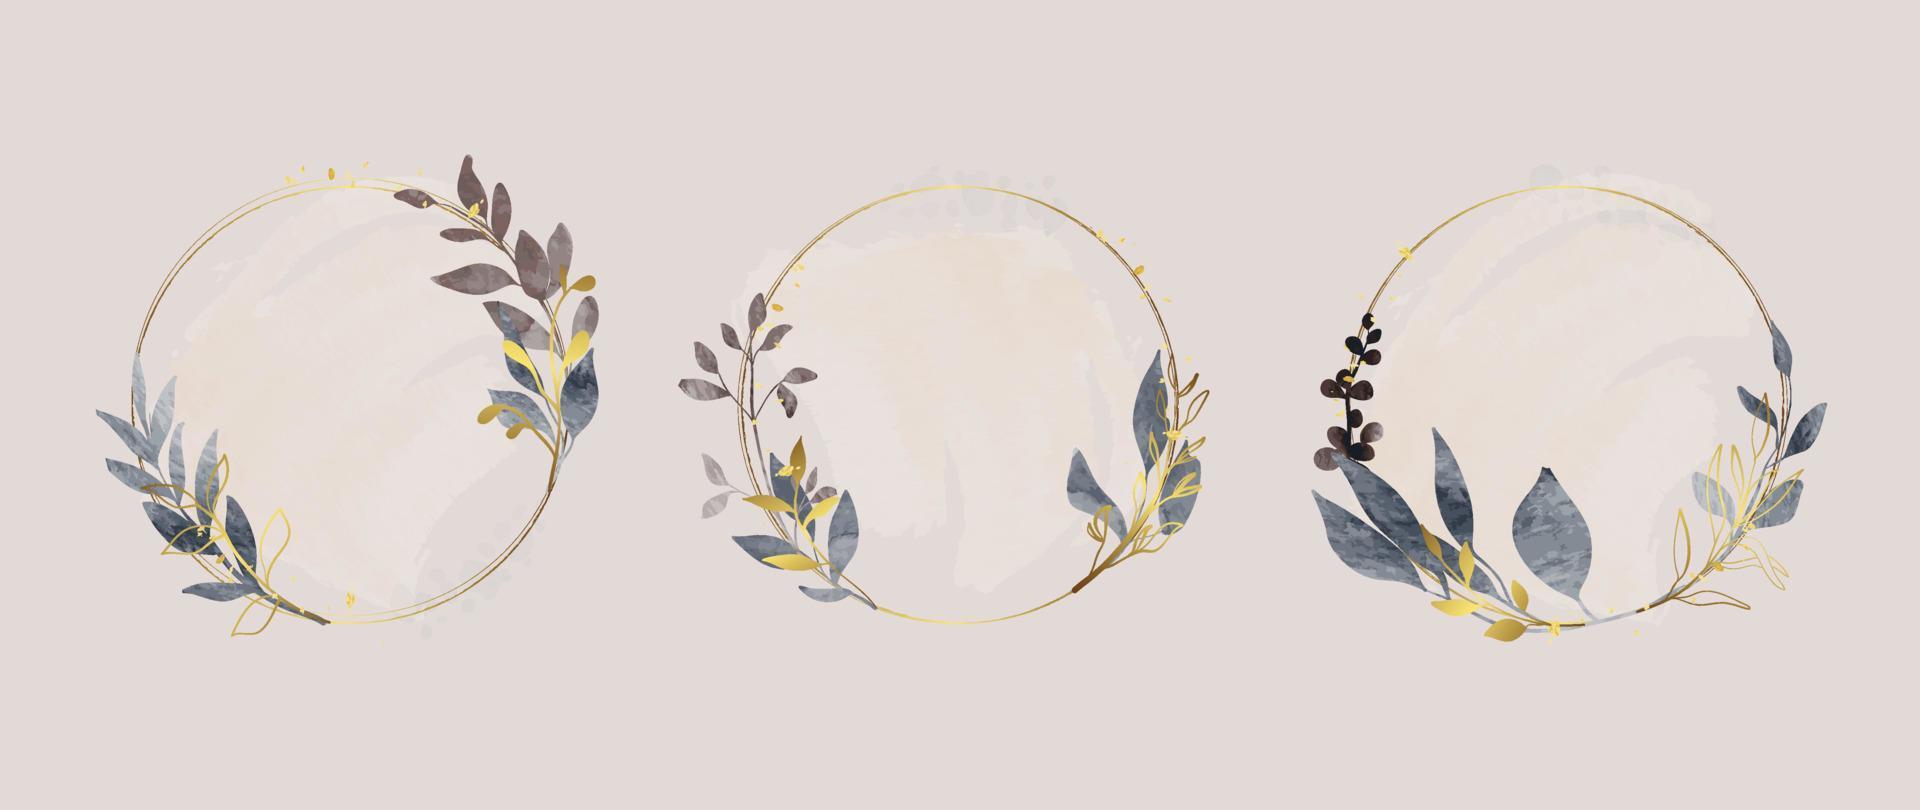 Set of luxury wedding frame element vector illustration. Watercolor and golden leaf branch with circle frame and brush stroke texture. Design suitable for frame, invitation card, poster, banner.